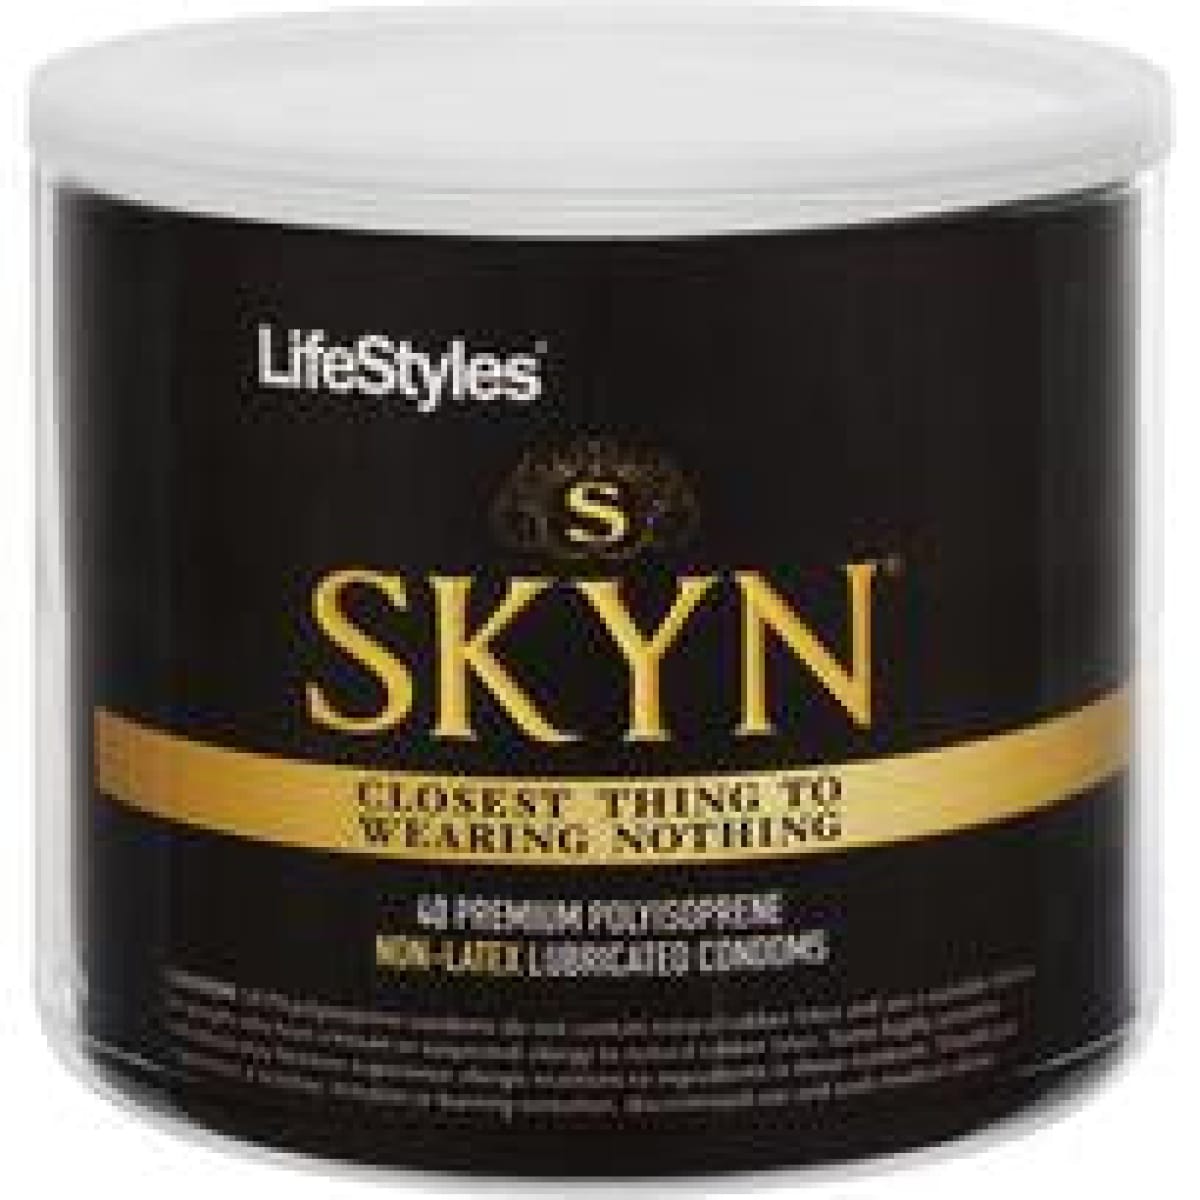 Lifestyles Skyn 40pc Bowl Intimates Adult Boutique